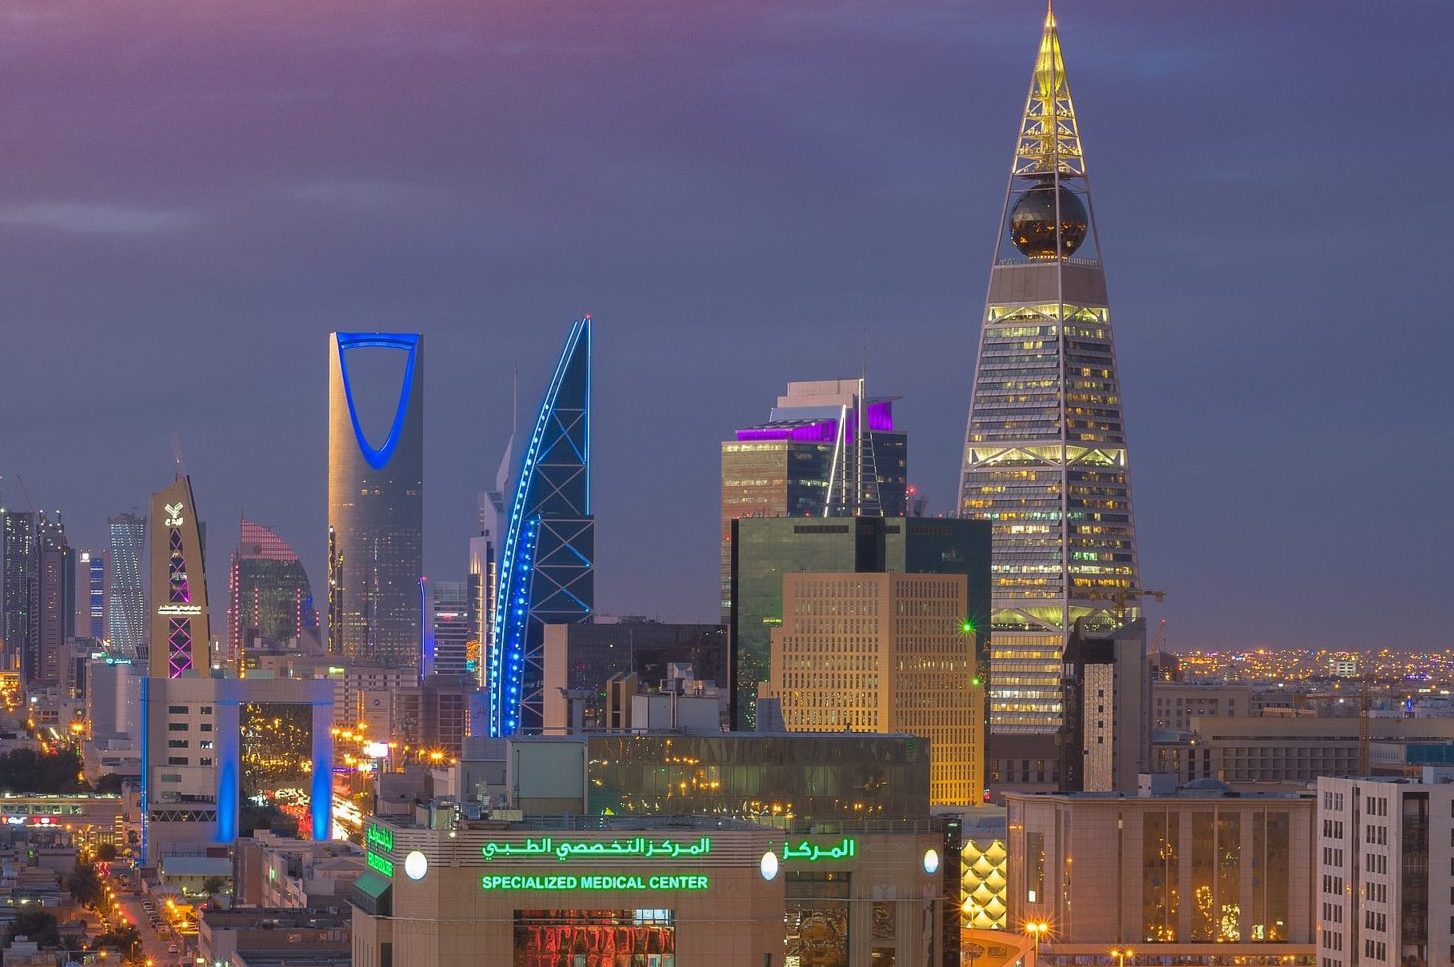 The Saudi government has unveiled plans to make an $800 million investment in its capital Riyadh.